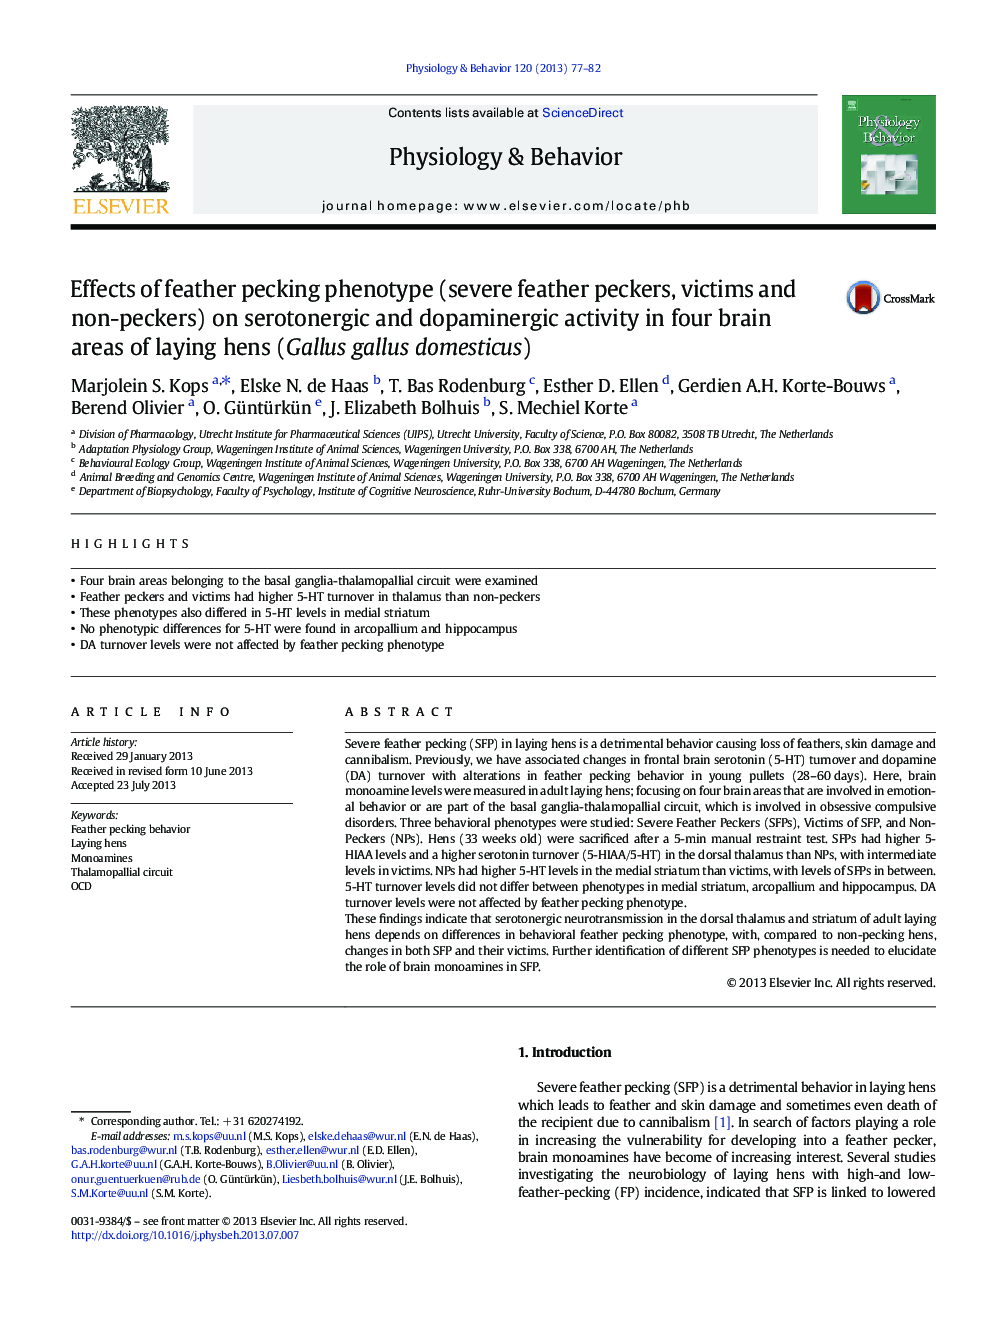 Effects of feather pecking phenotype (severe feather peckers, victims and non-peckers) on serotonergic and dopaminergic activity in four brain areas of laying hens (Gallus gallus domesticus)